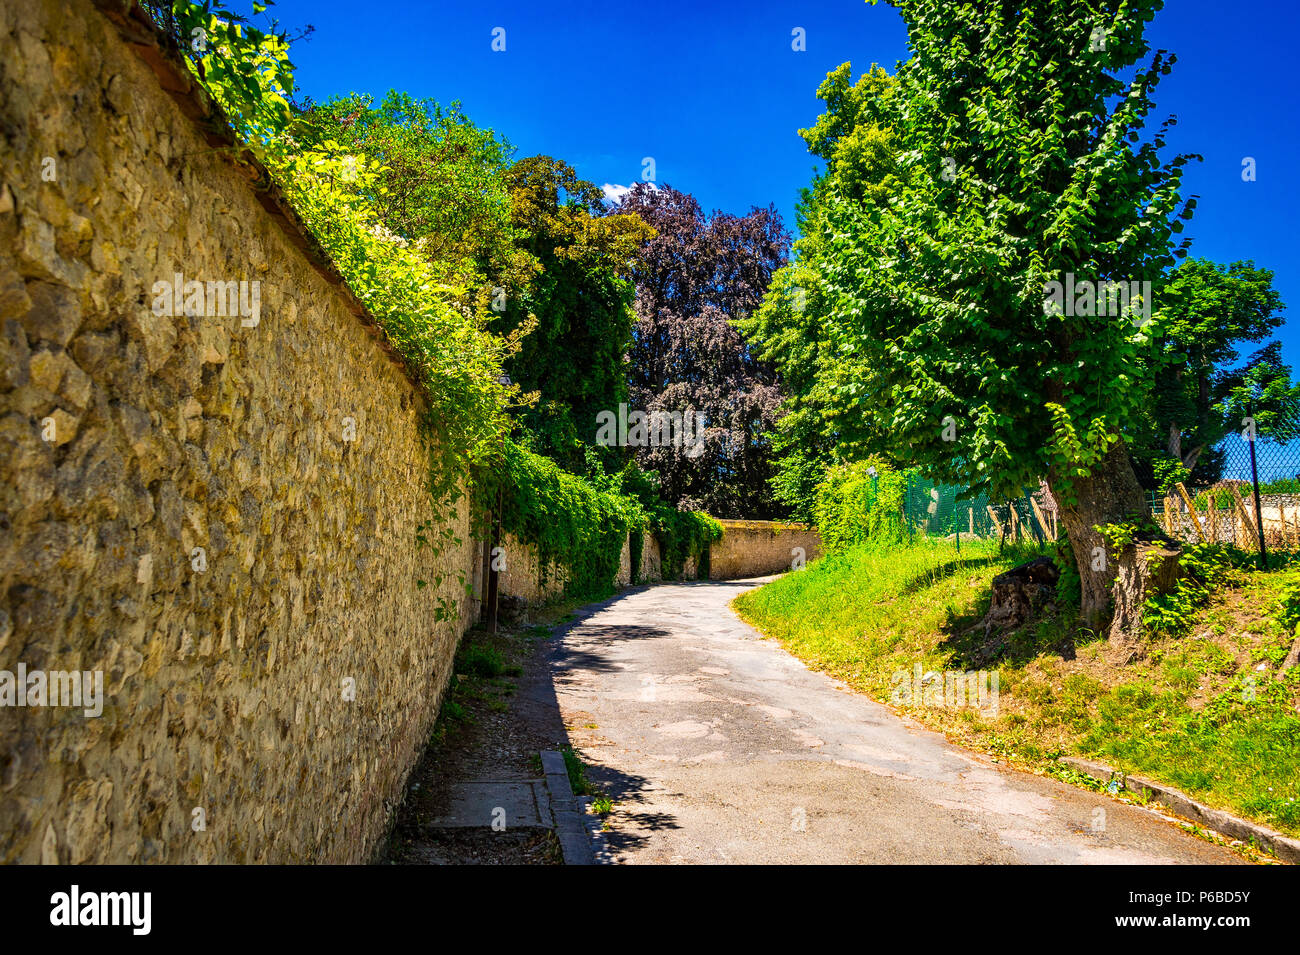 A road in the medieval town of Provins, France Stock Photo